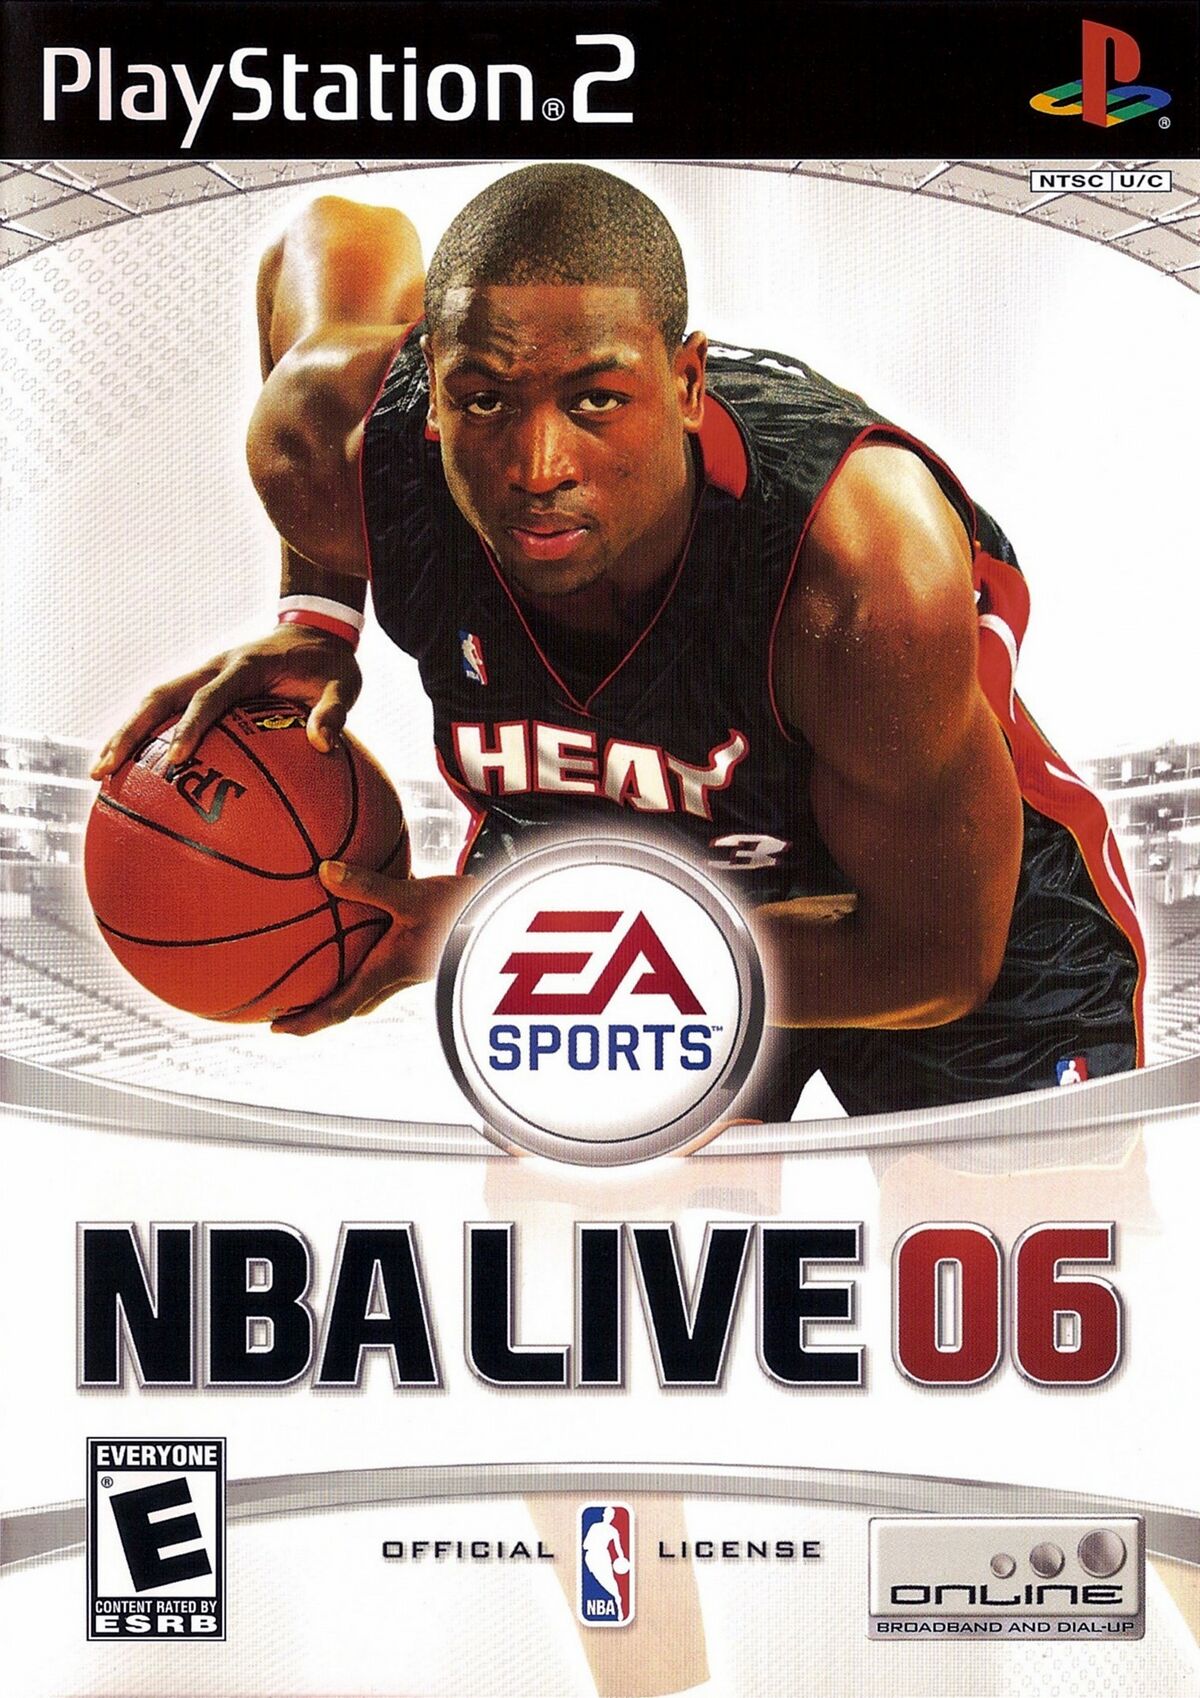 NBA Live 06 — StrategyWiki Strategy guide and game reference wiki